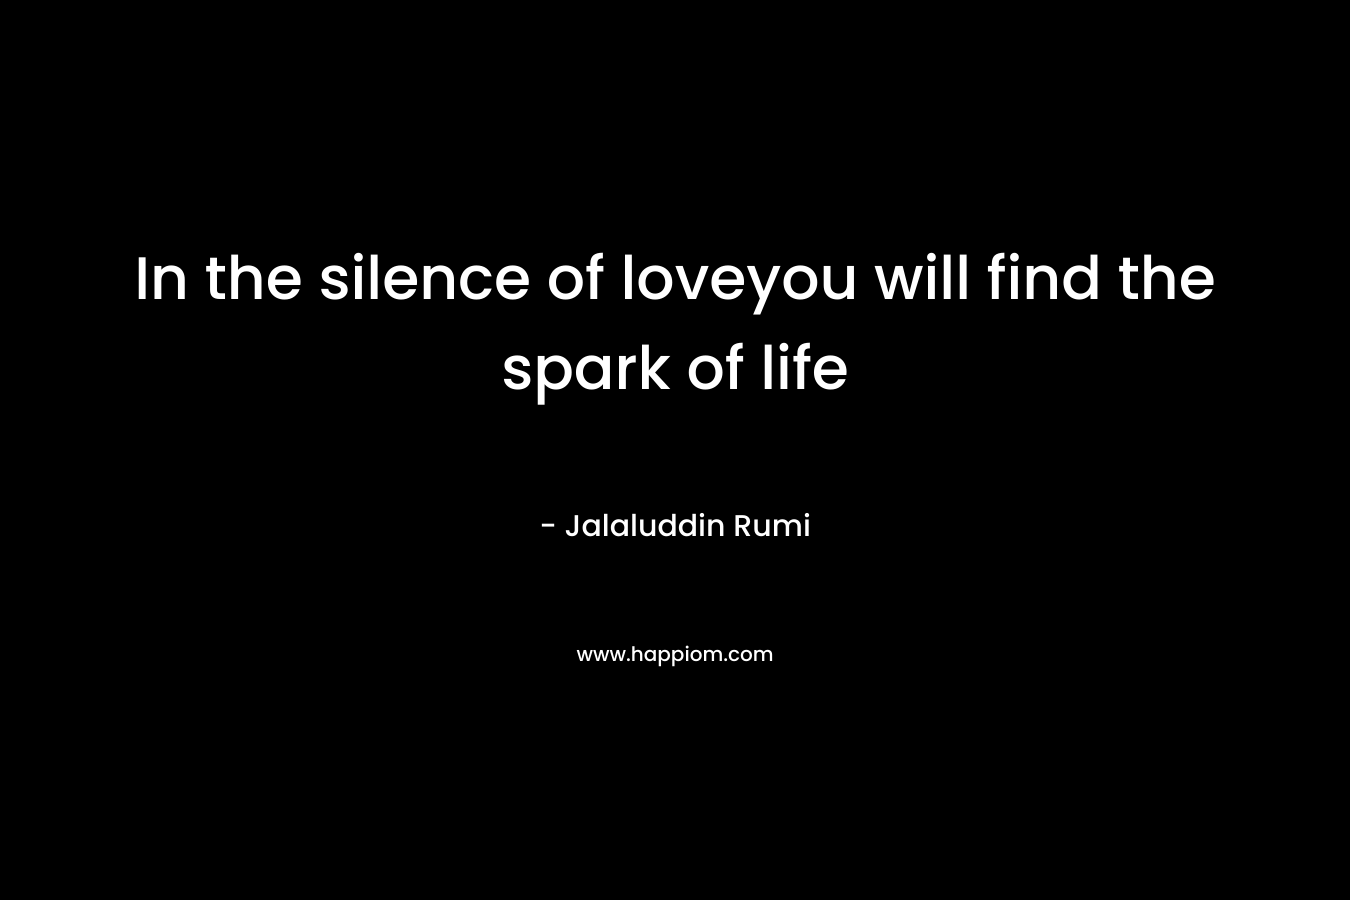 In the silence of loveyou will find the spark of life – Jalaluddin Rumi